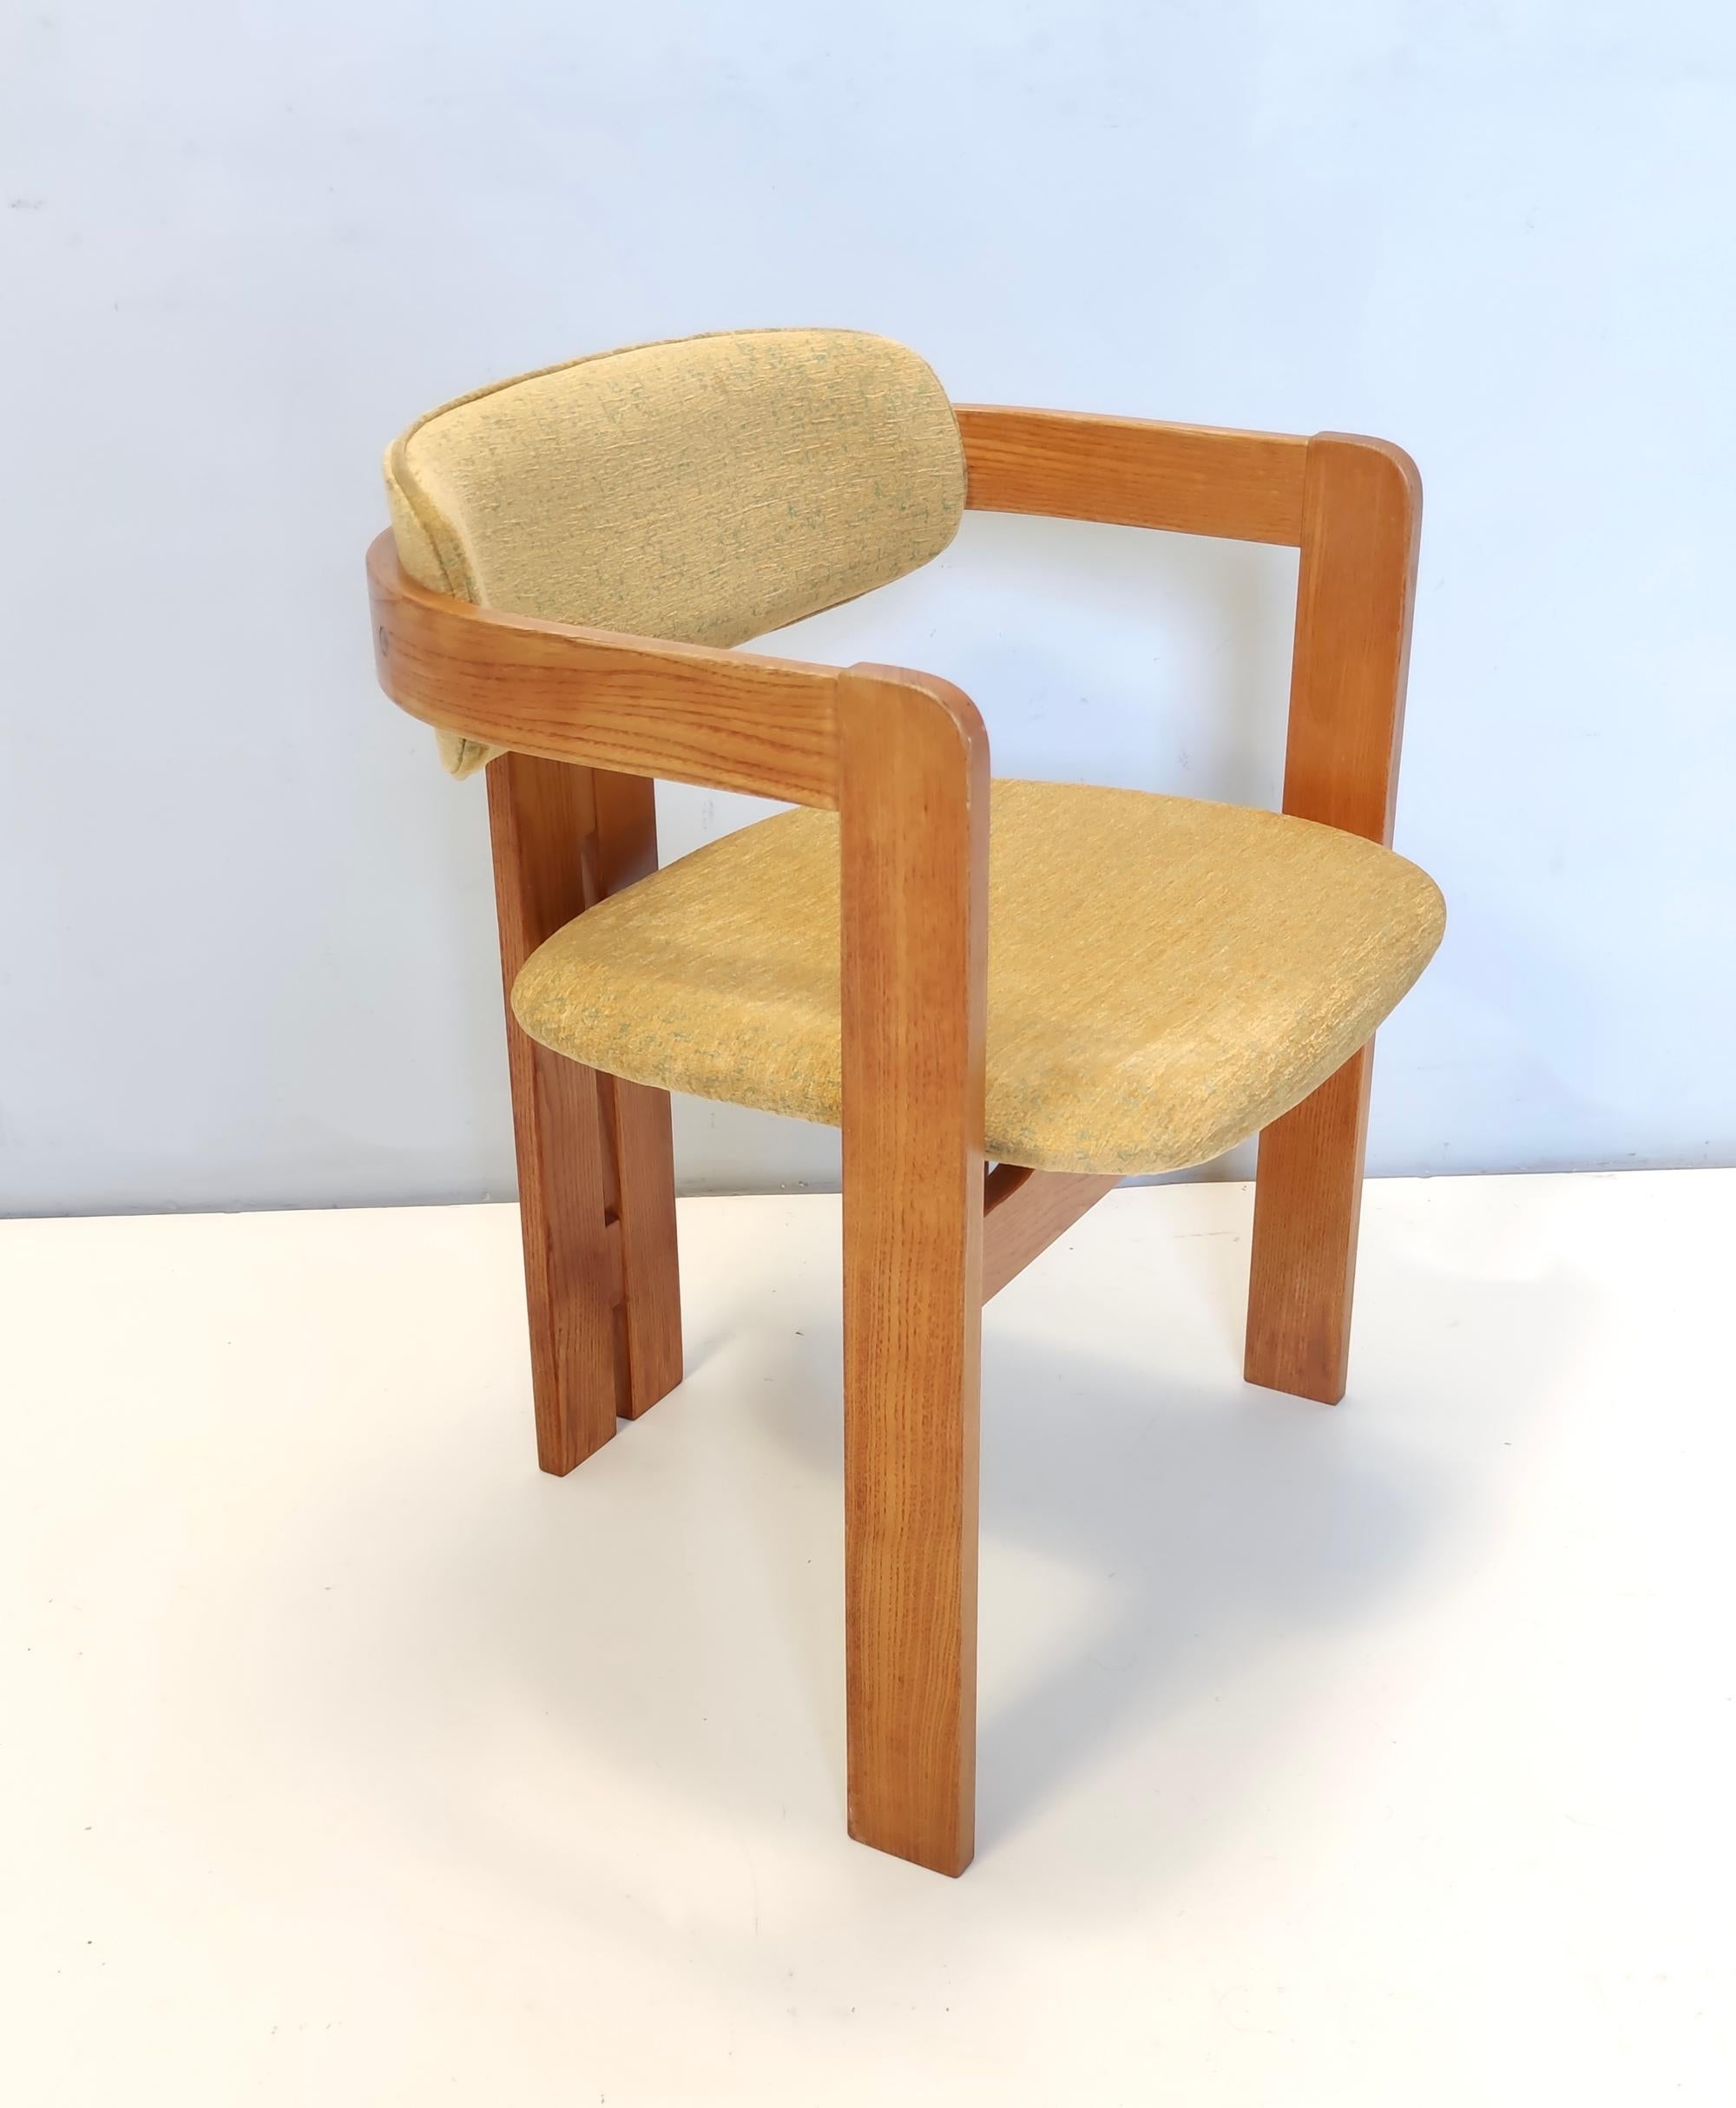 Italian Pigreco Chair in the style of Tobia Scarpa for Gavina with Yellow Upholstery